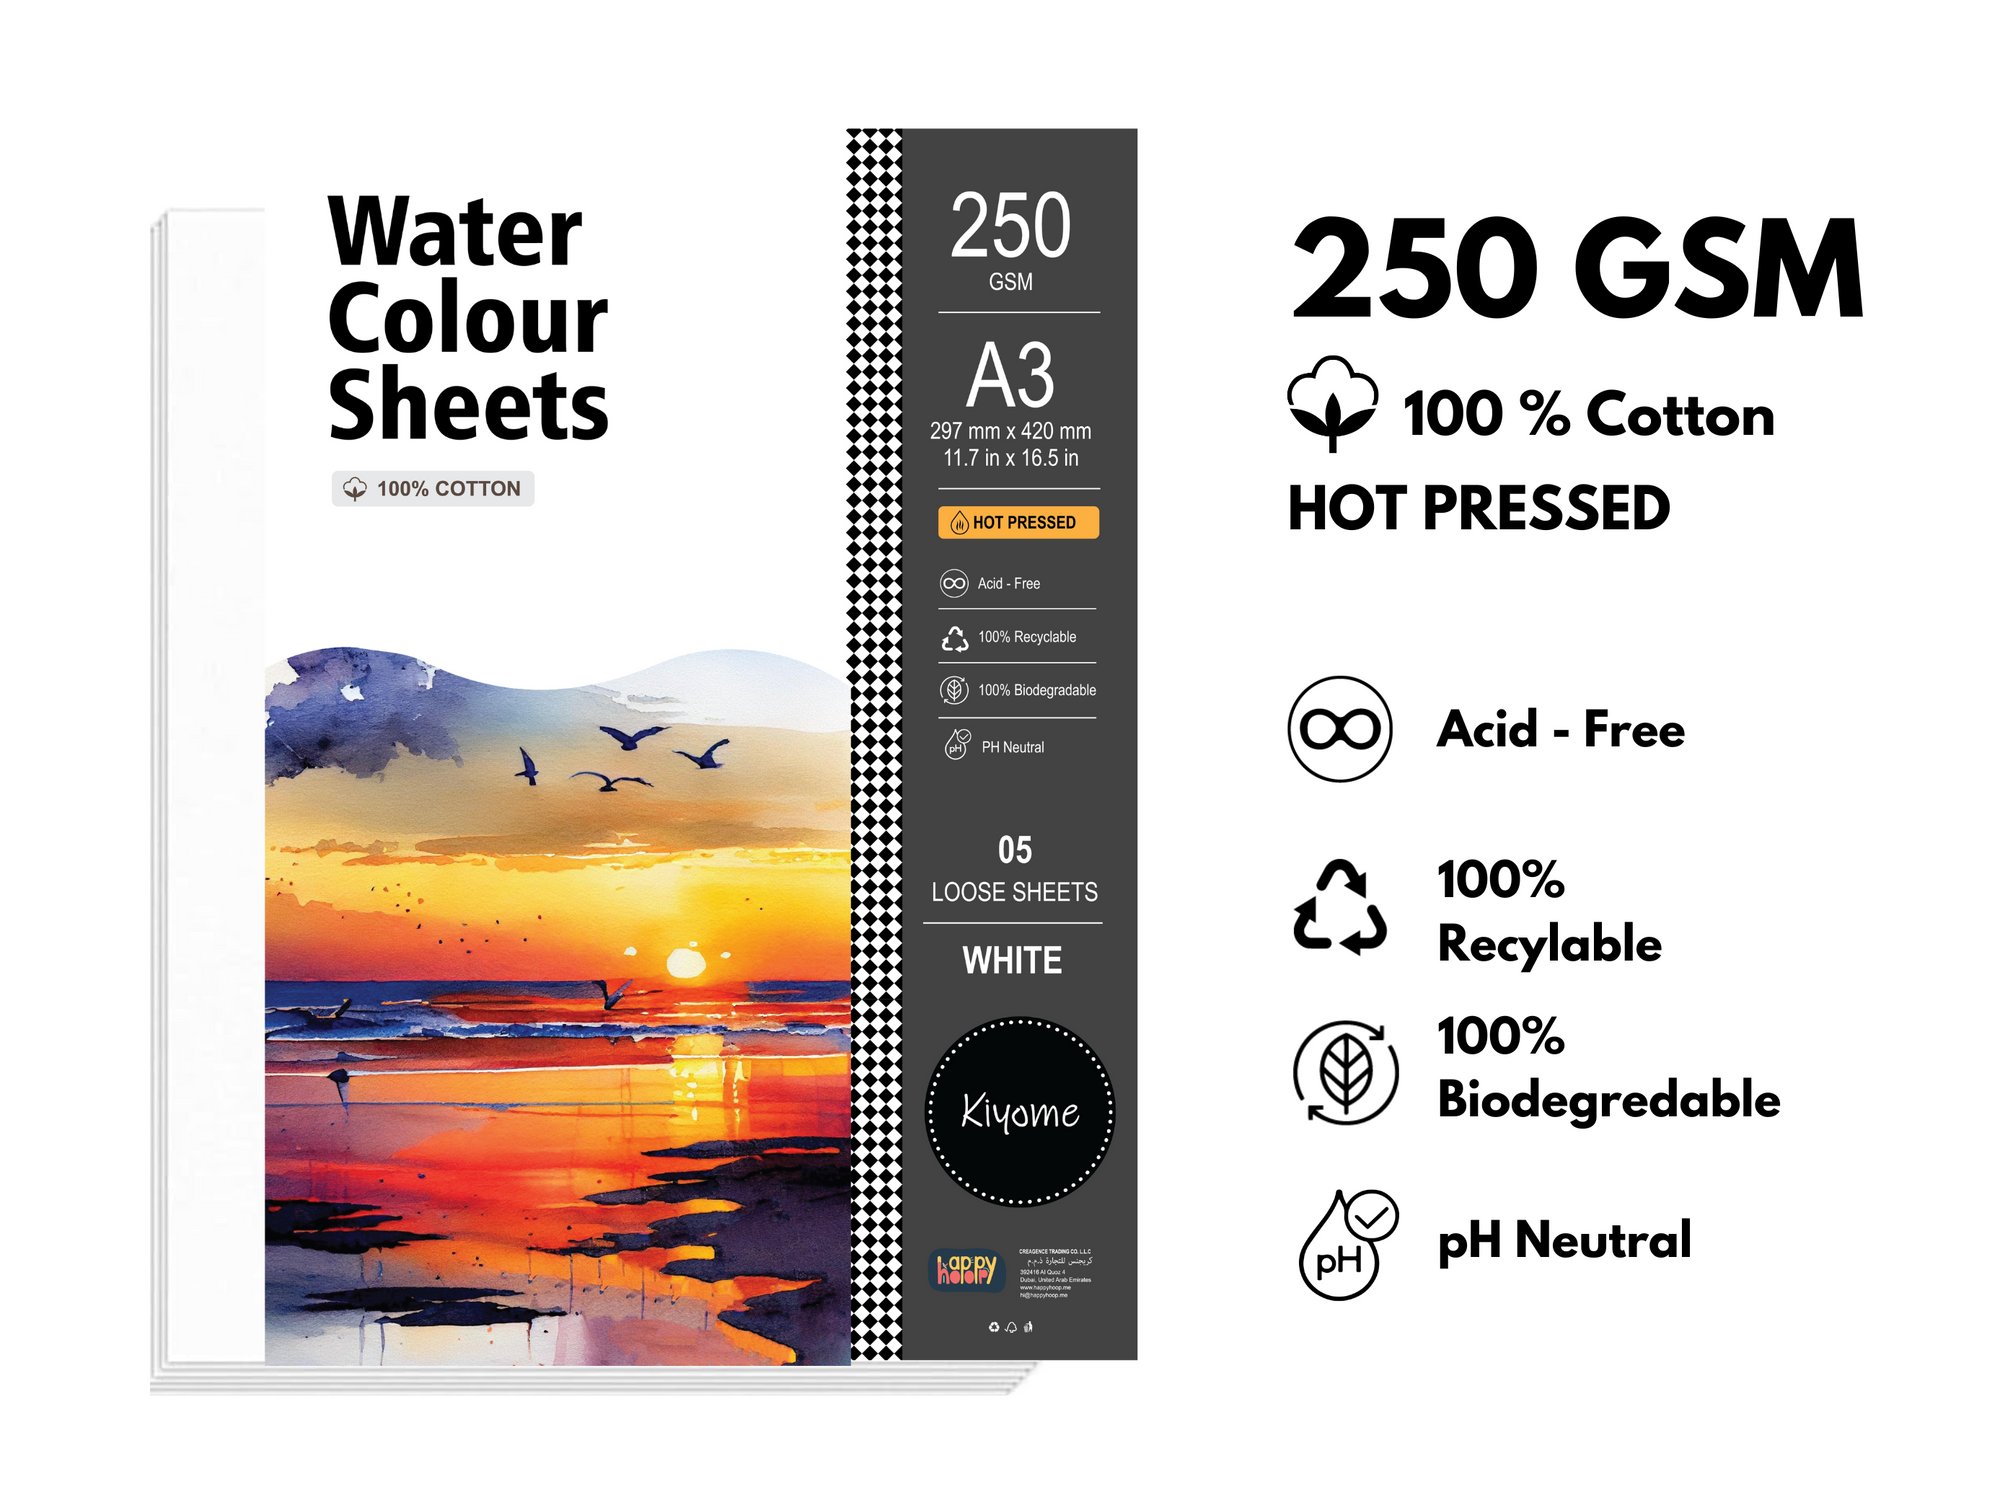 Kiyome 100% Cotton Watercolour Sheets | Hot Pressed | 250 GSM | A3 | 5 Sheets